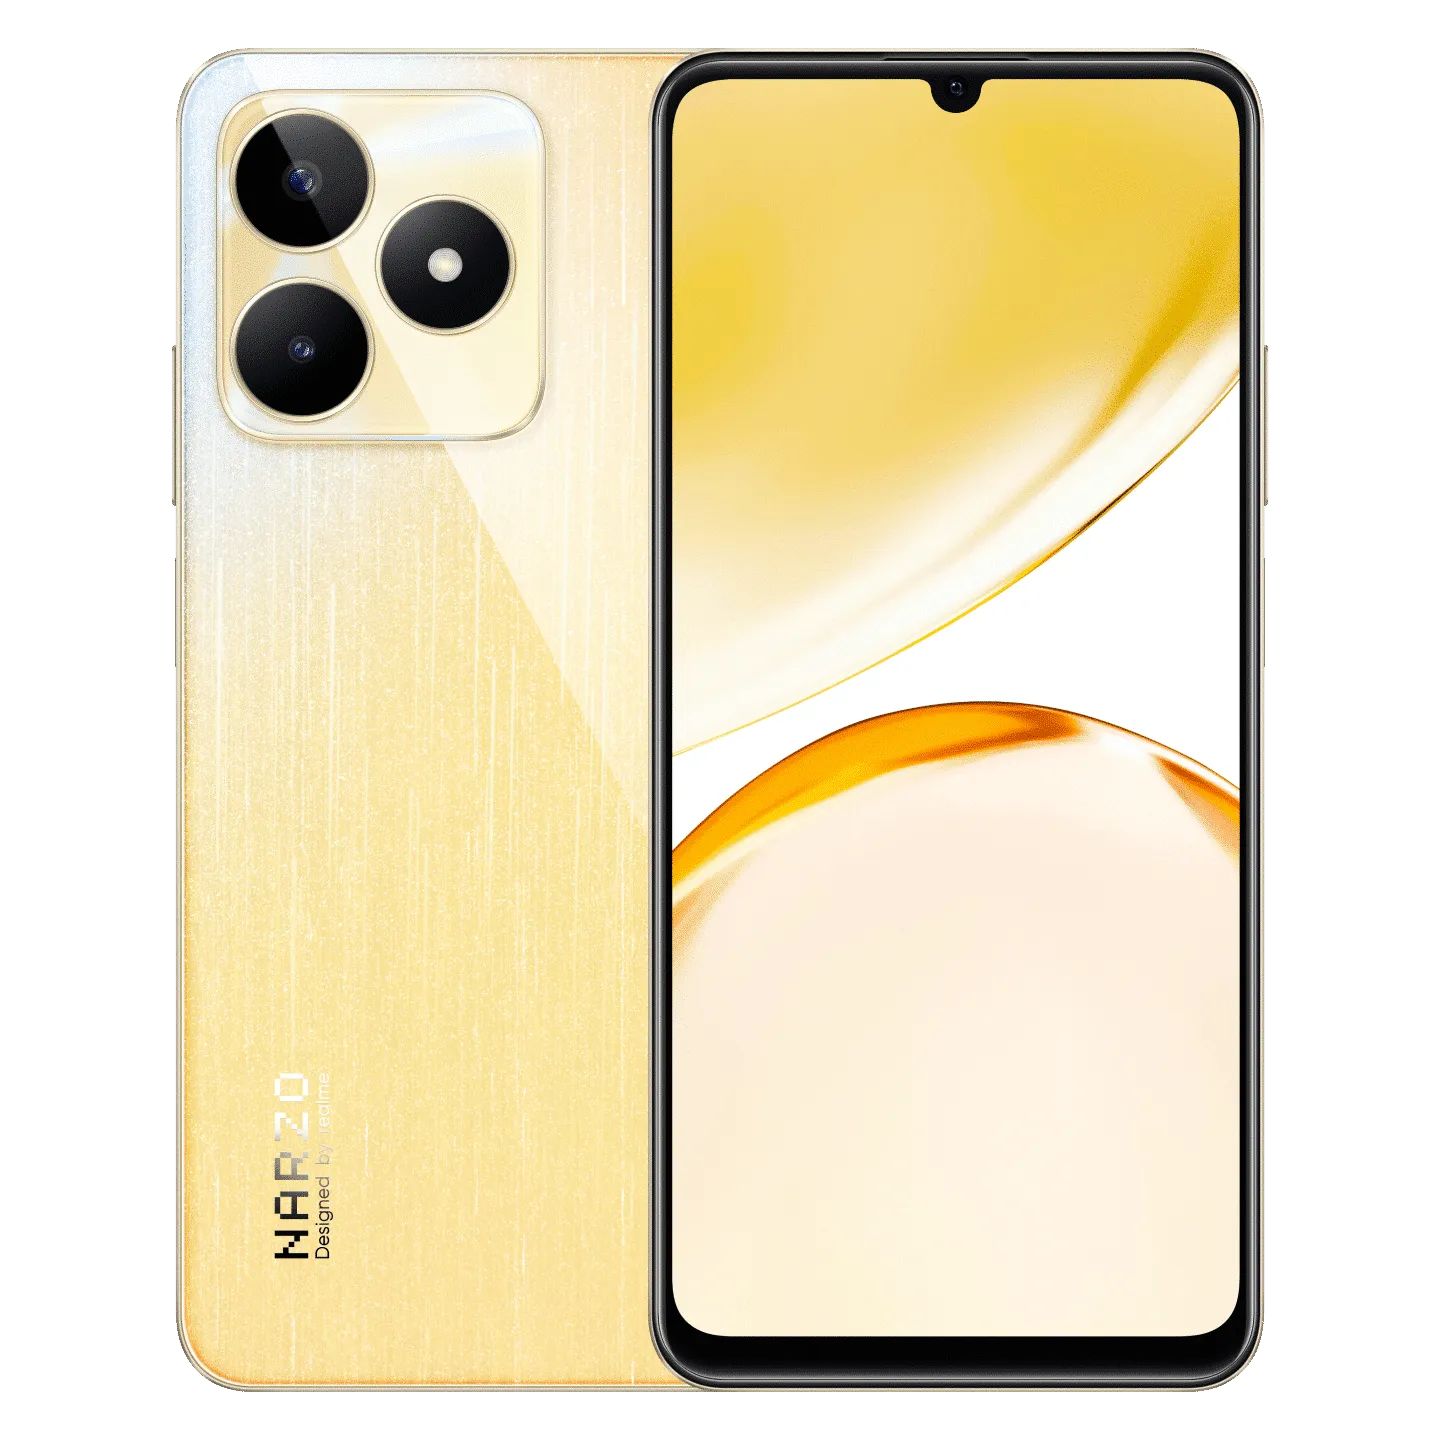 Realme Narzo N53 Smartphone with 4GB/6GB RAM and 64GB/128GB Internal Memory with 4G Connectivity